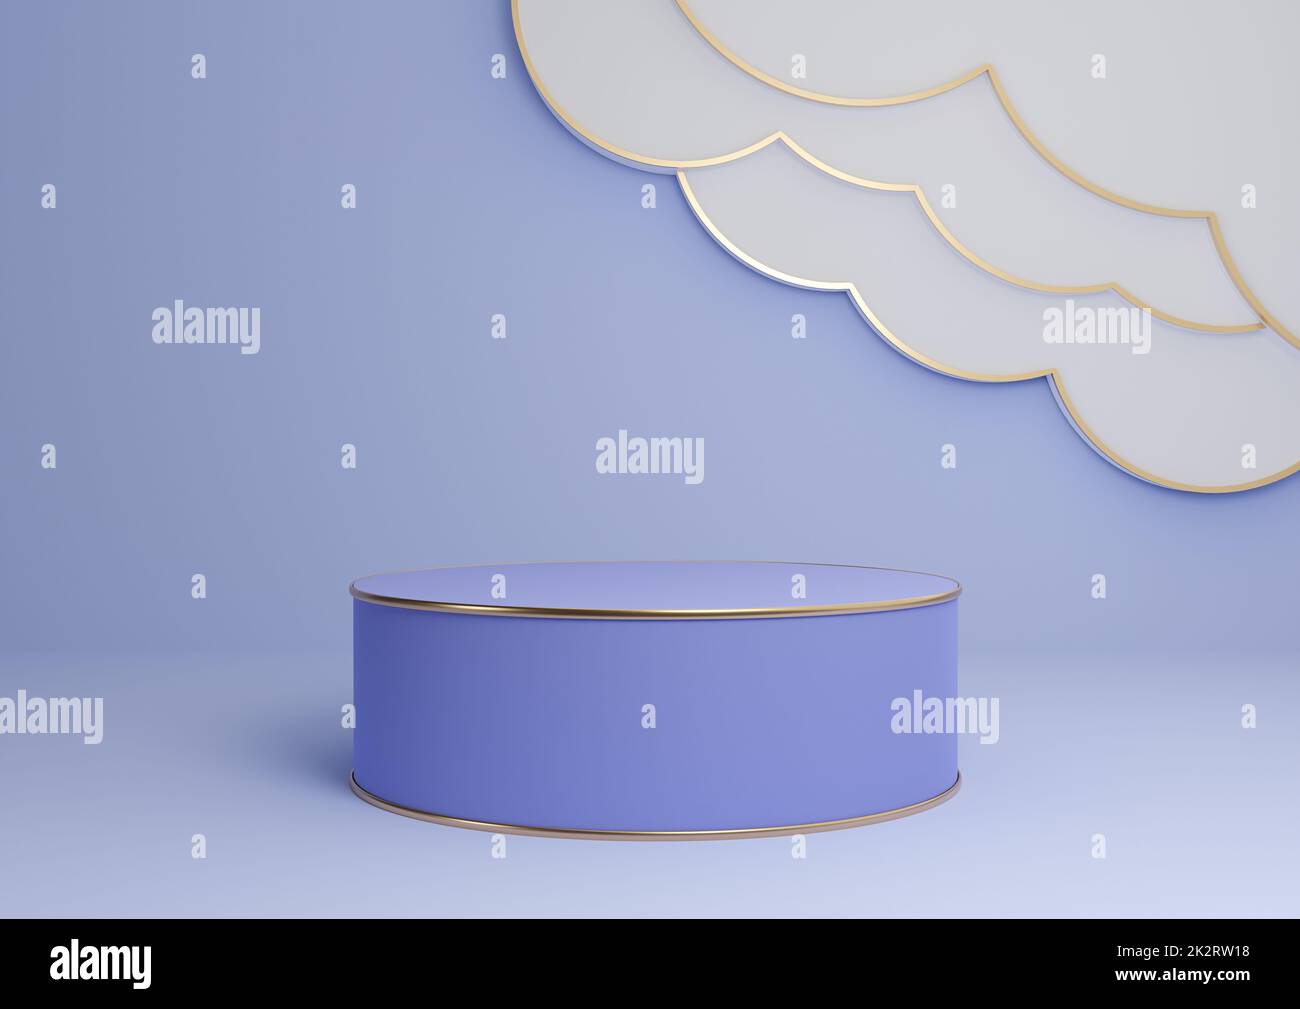 Light, pastel blue 3D rendering product display podium or stand with abstract clouds and golden lines luxurious minimal, simple composition background cylinder platform Stock Photo